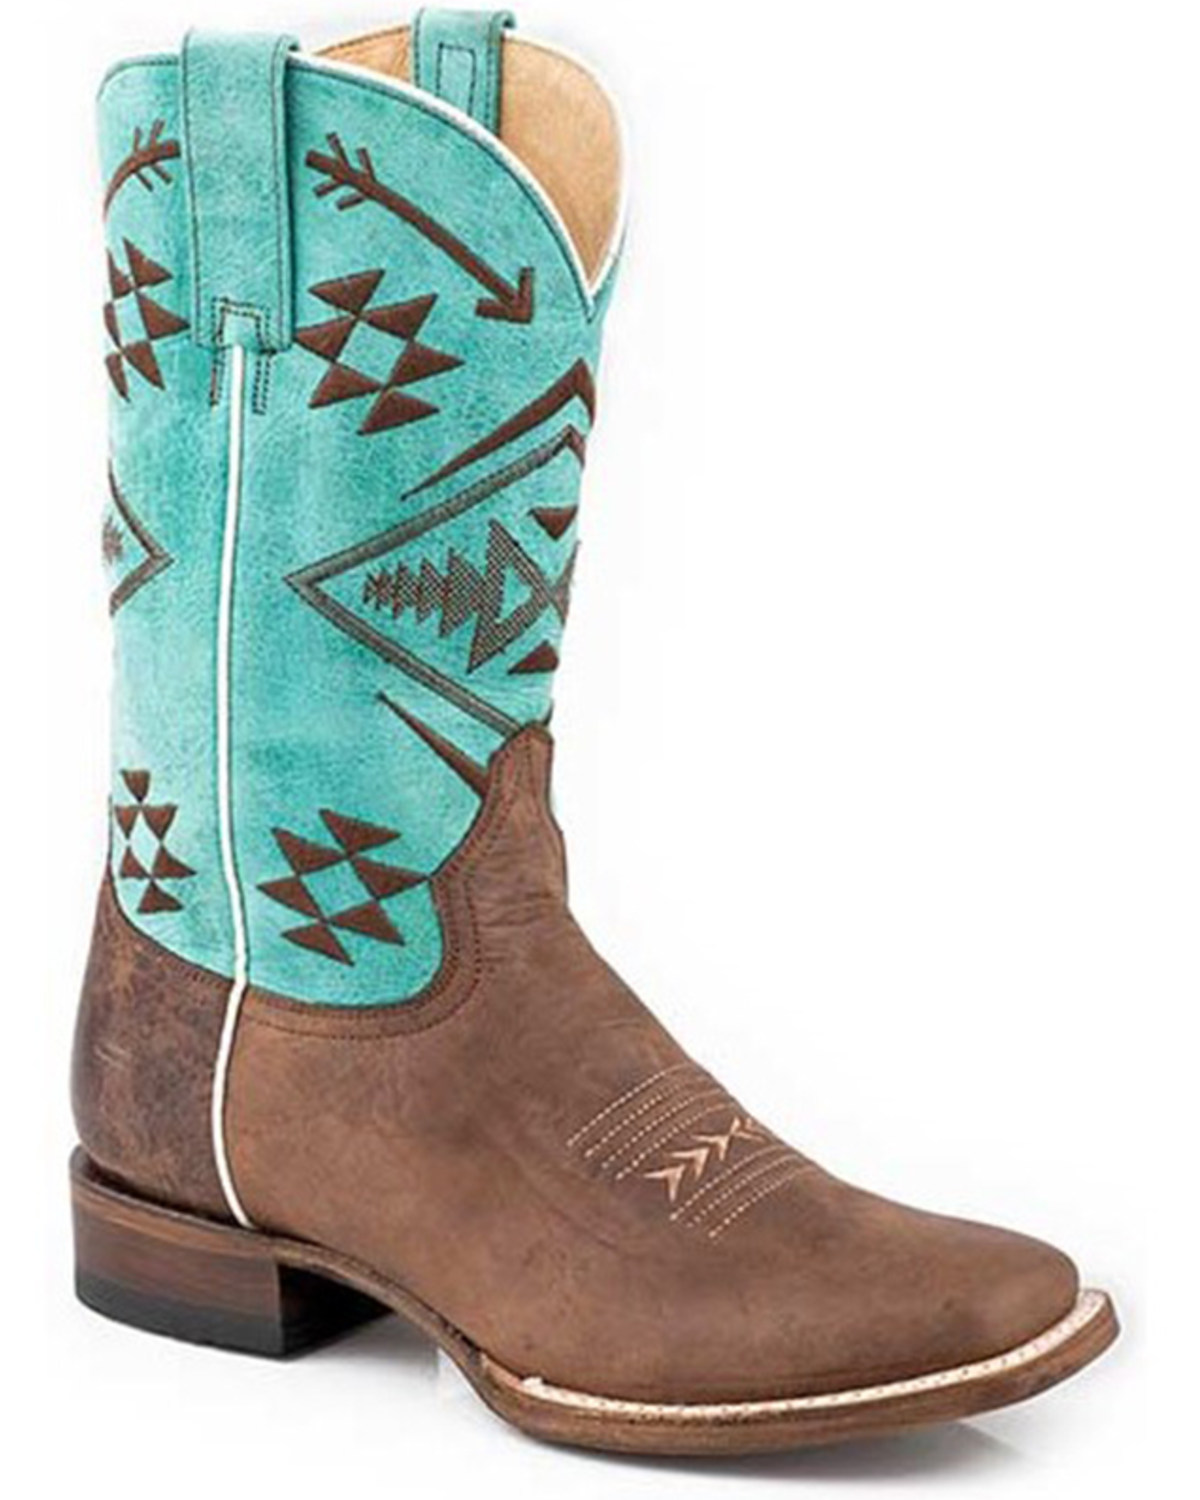 Roper Women's Ruby Burnished Southwestern Embroidered Western Boots - Square Toe